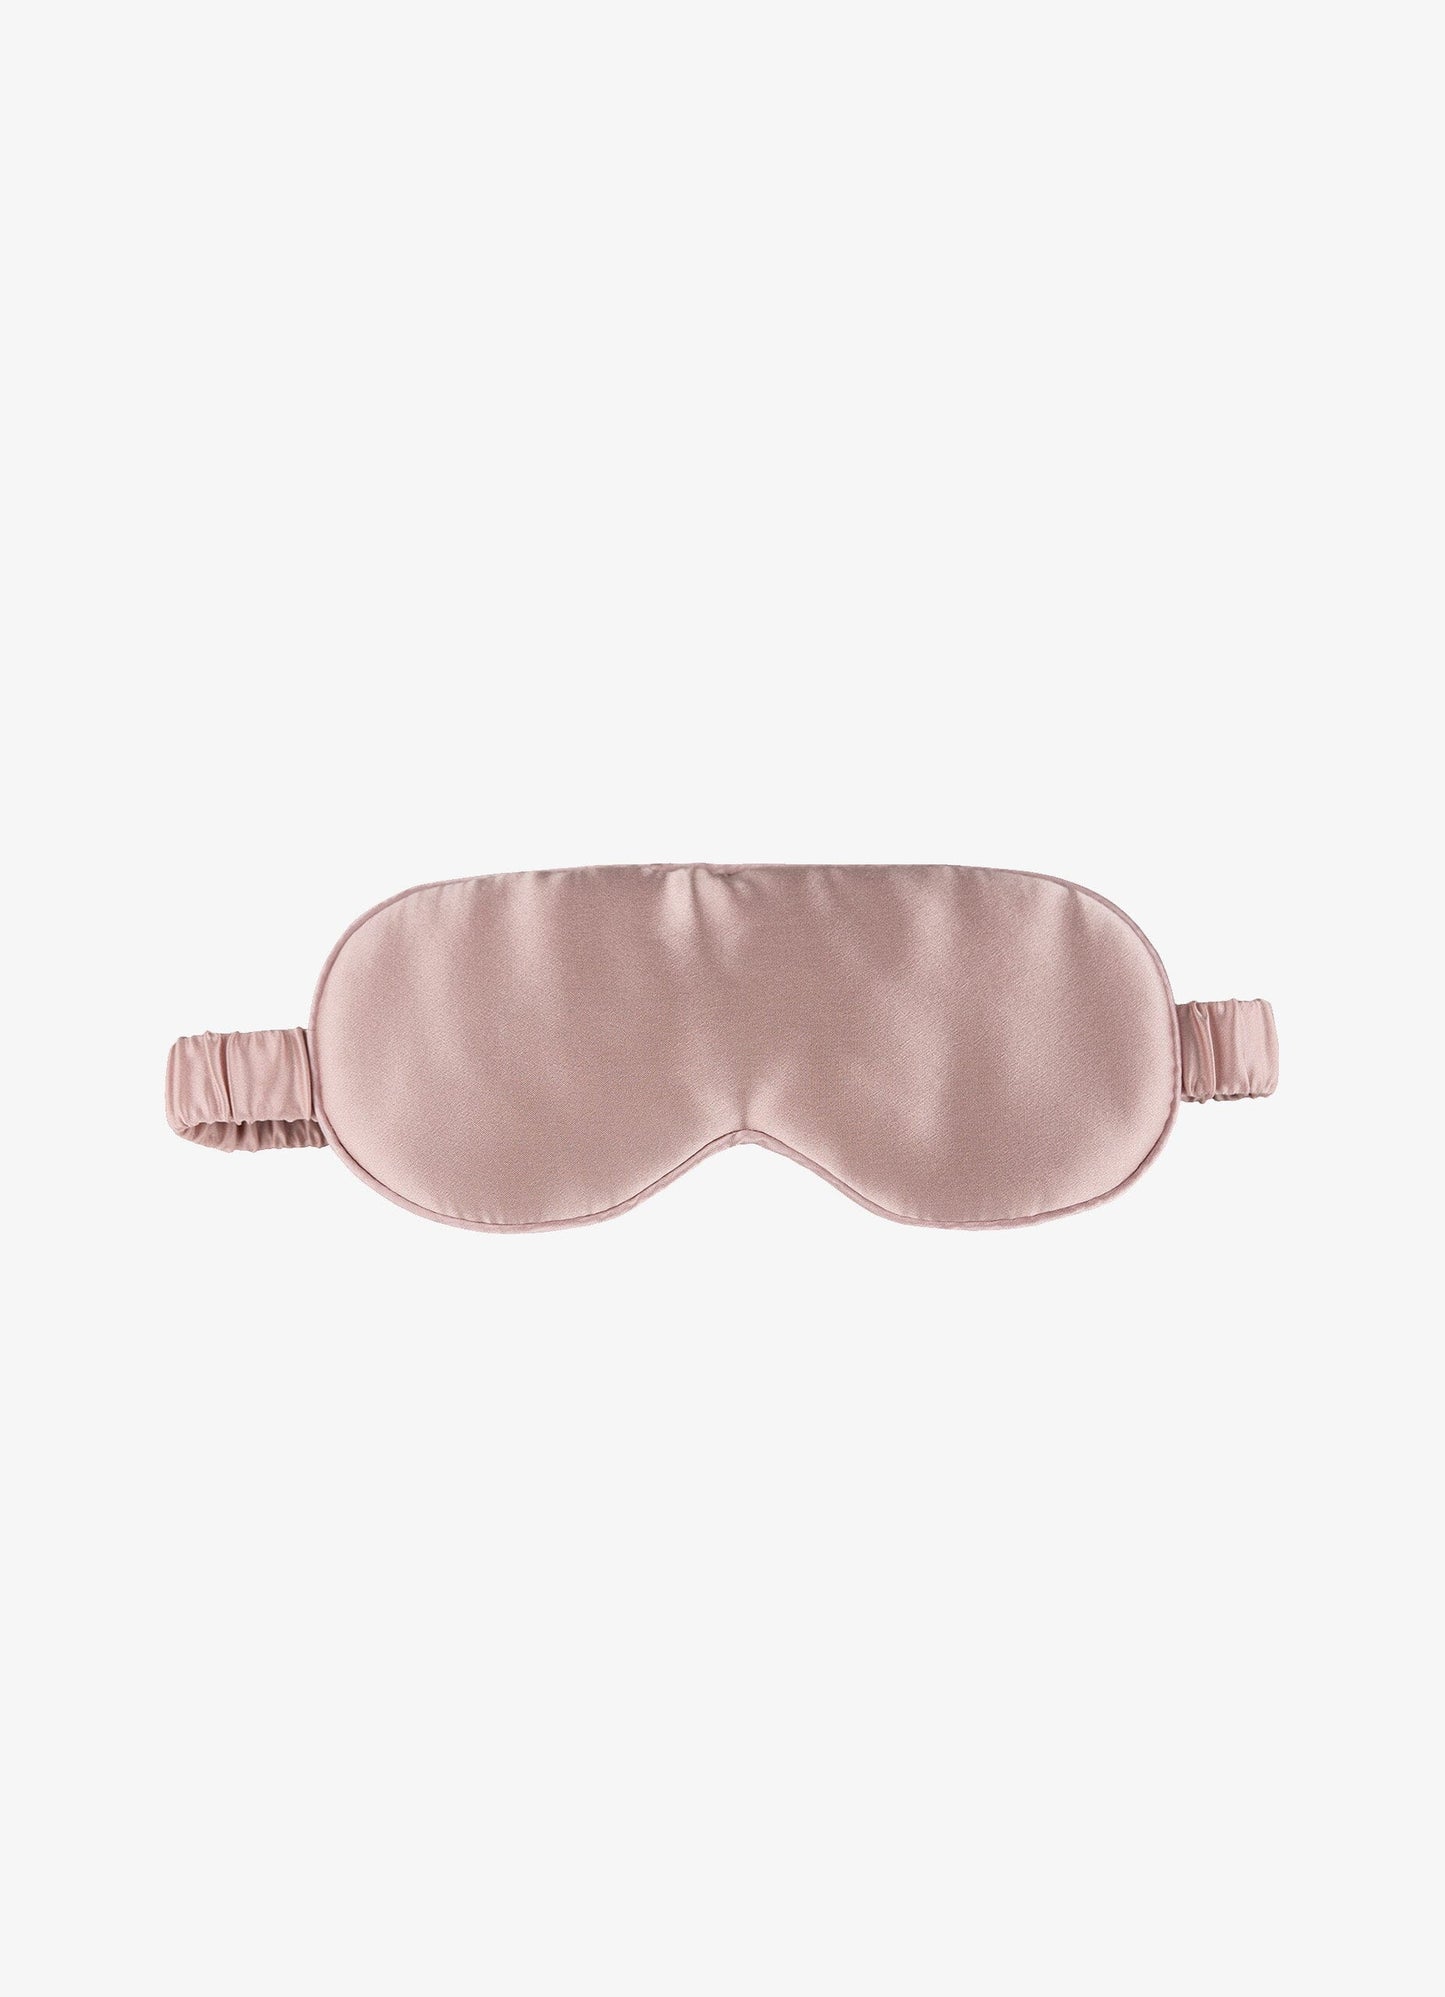 Pink Eye Mask - Perfect Gift for Women's Month